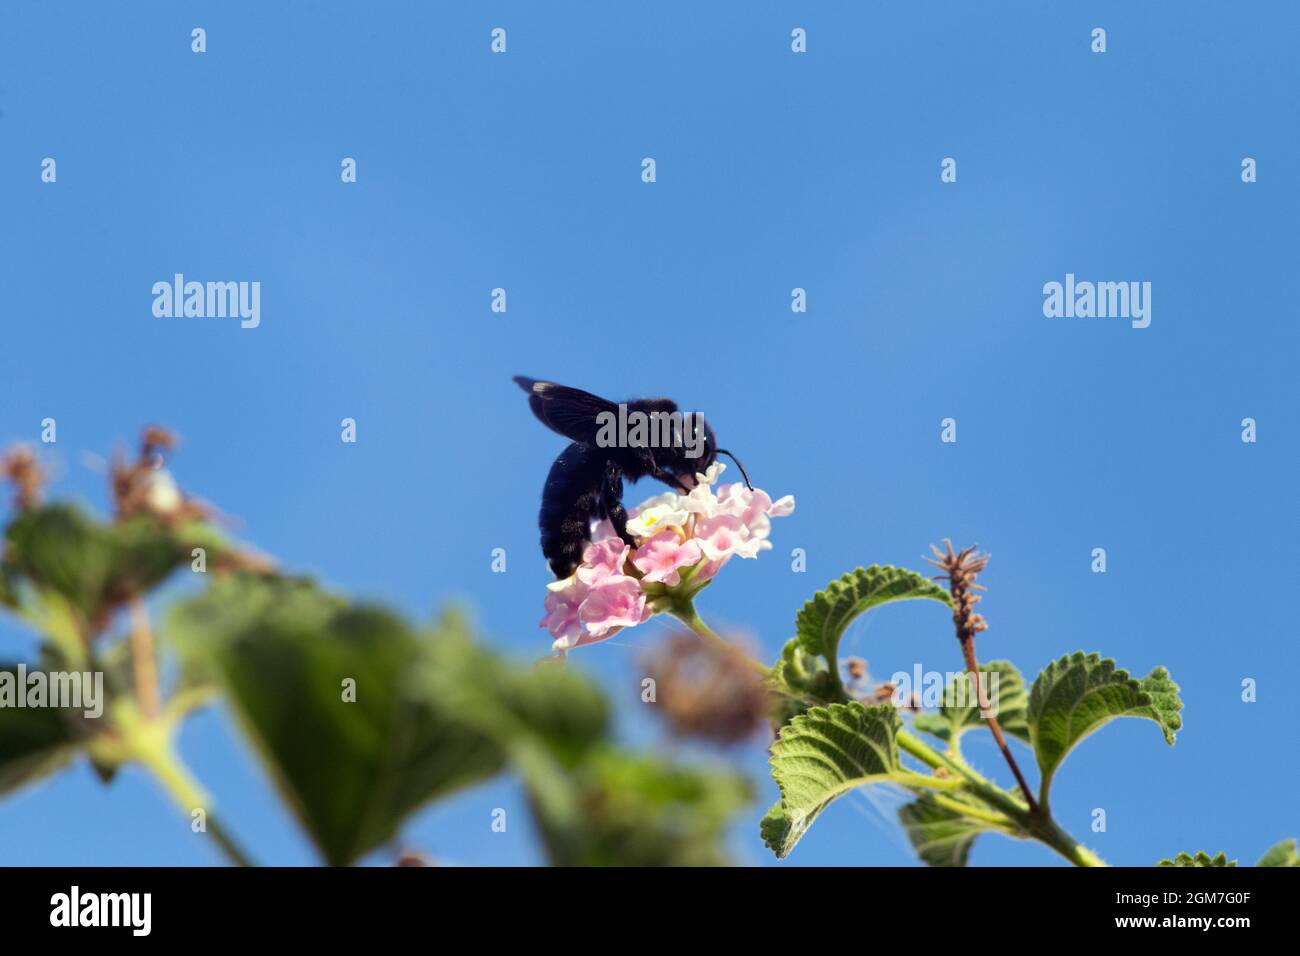 Close-up of a violet carpenter bee, aka big wood bee, feeding on pollens of a cluster of pink and white flowers under blue sky. Stock Photo